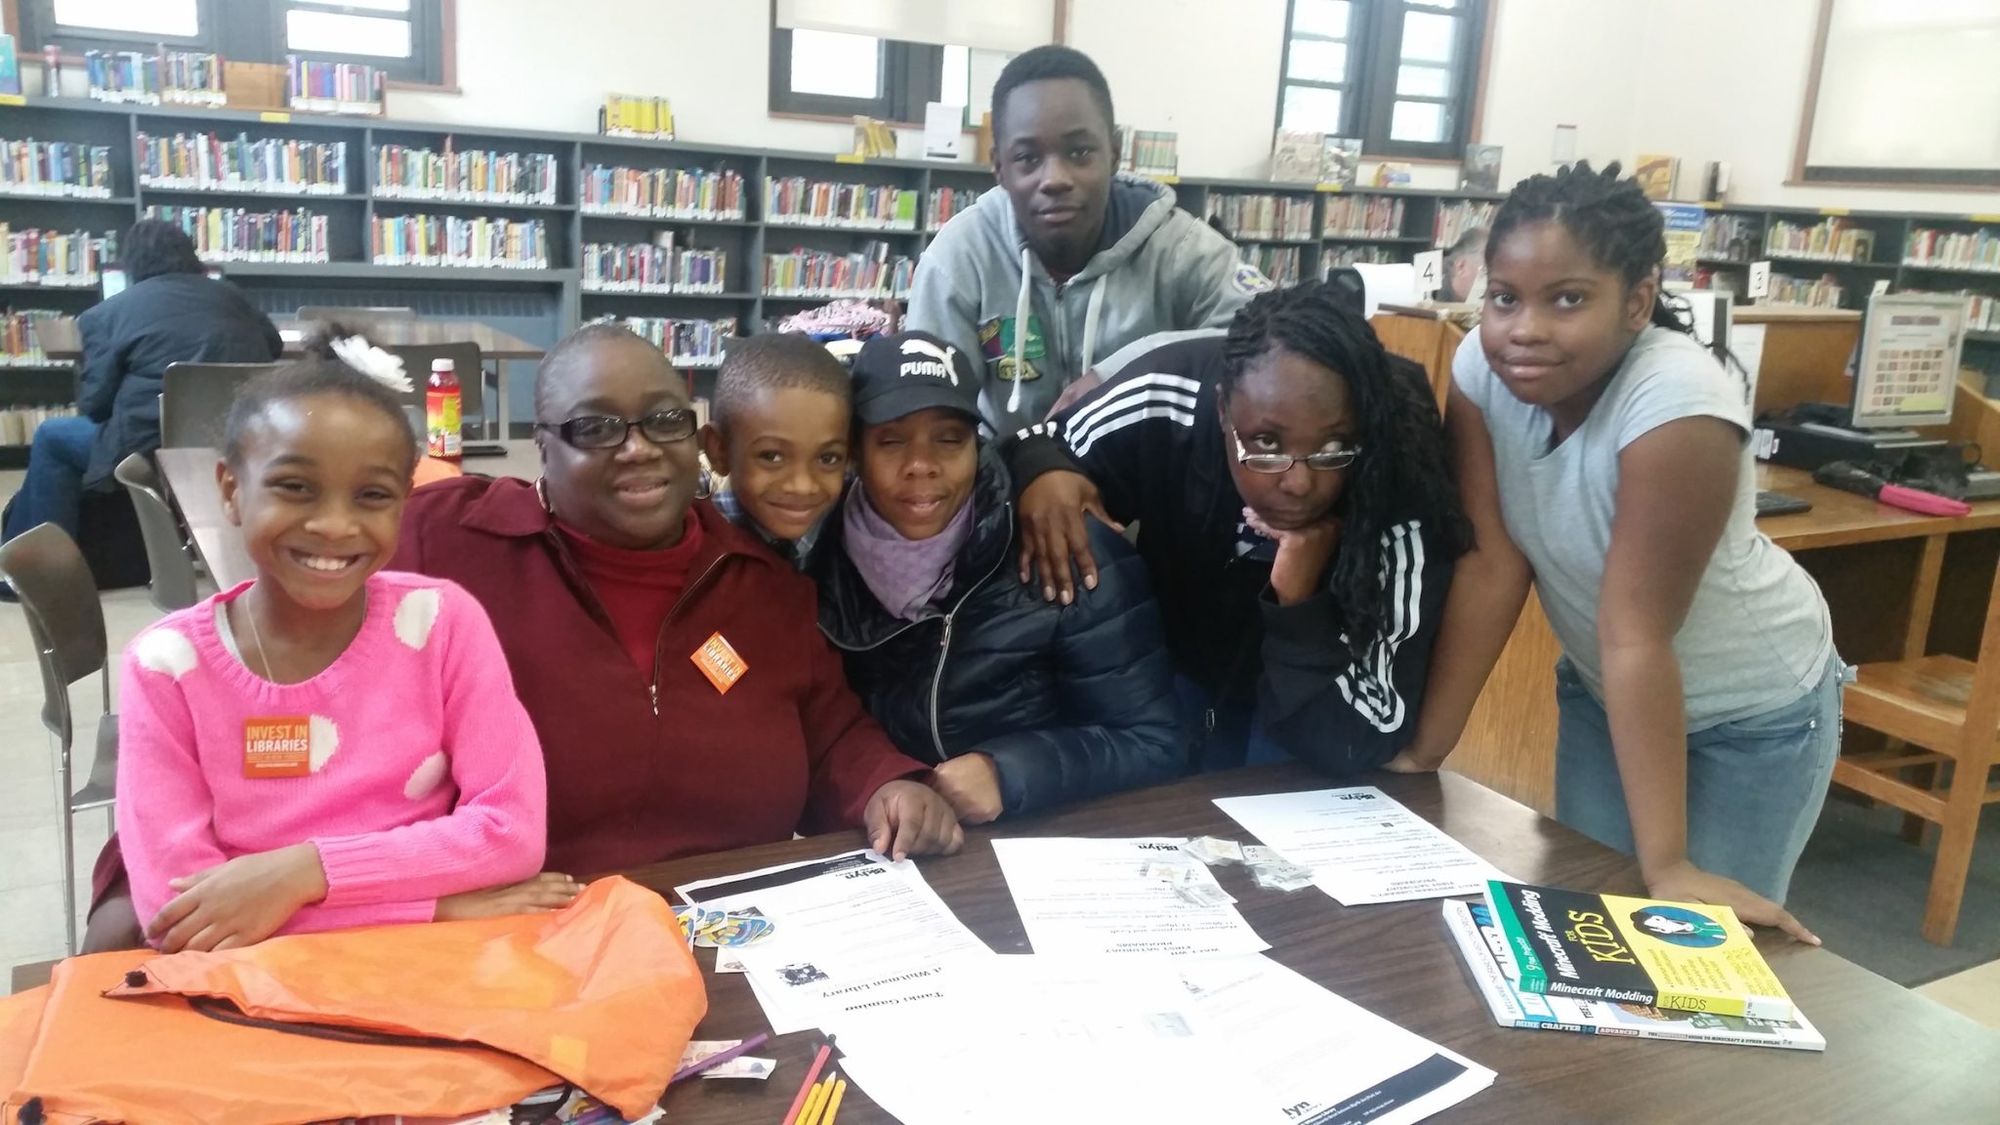 The Friends of Walt Whitman Library have organized a Family Day! (Photo by Heather Chin/Fort Greene Focus)